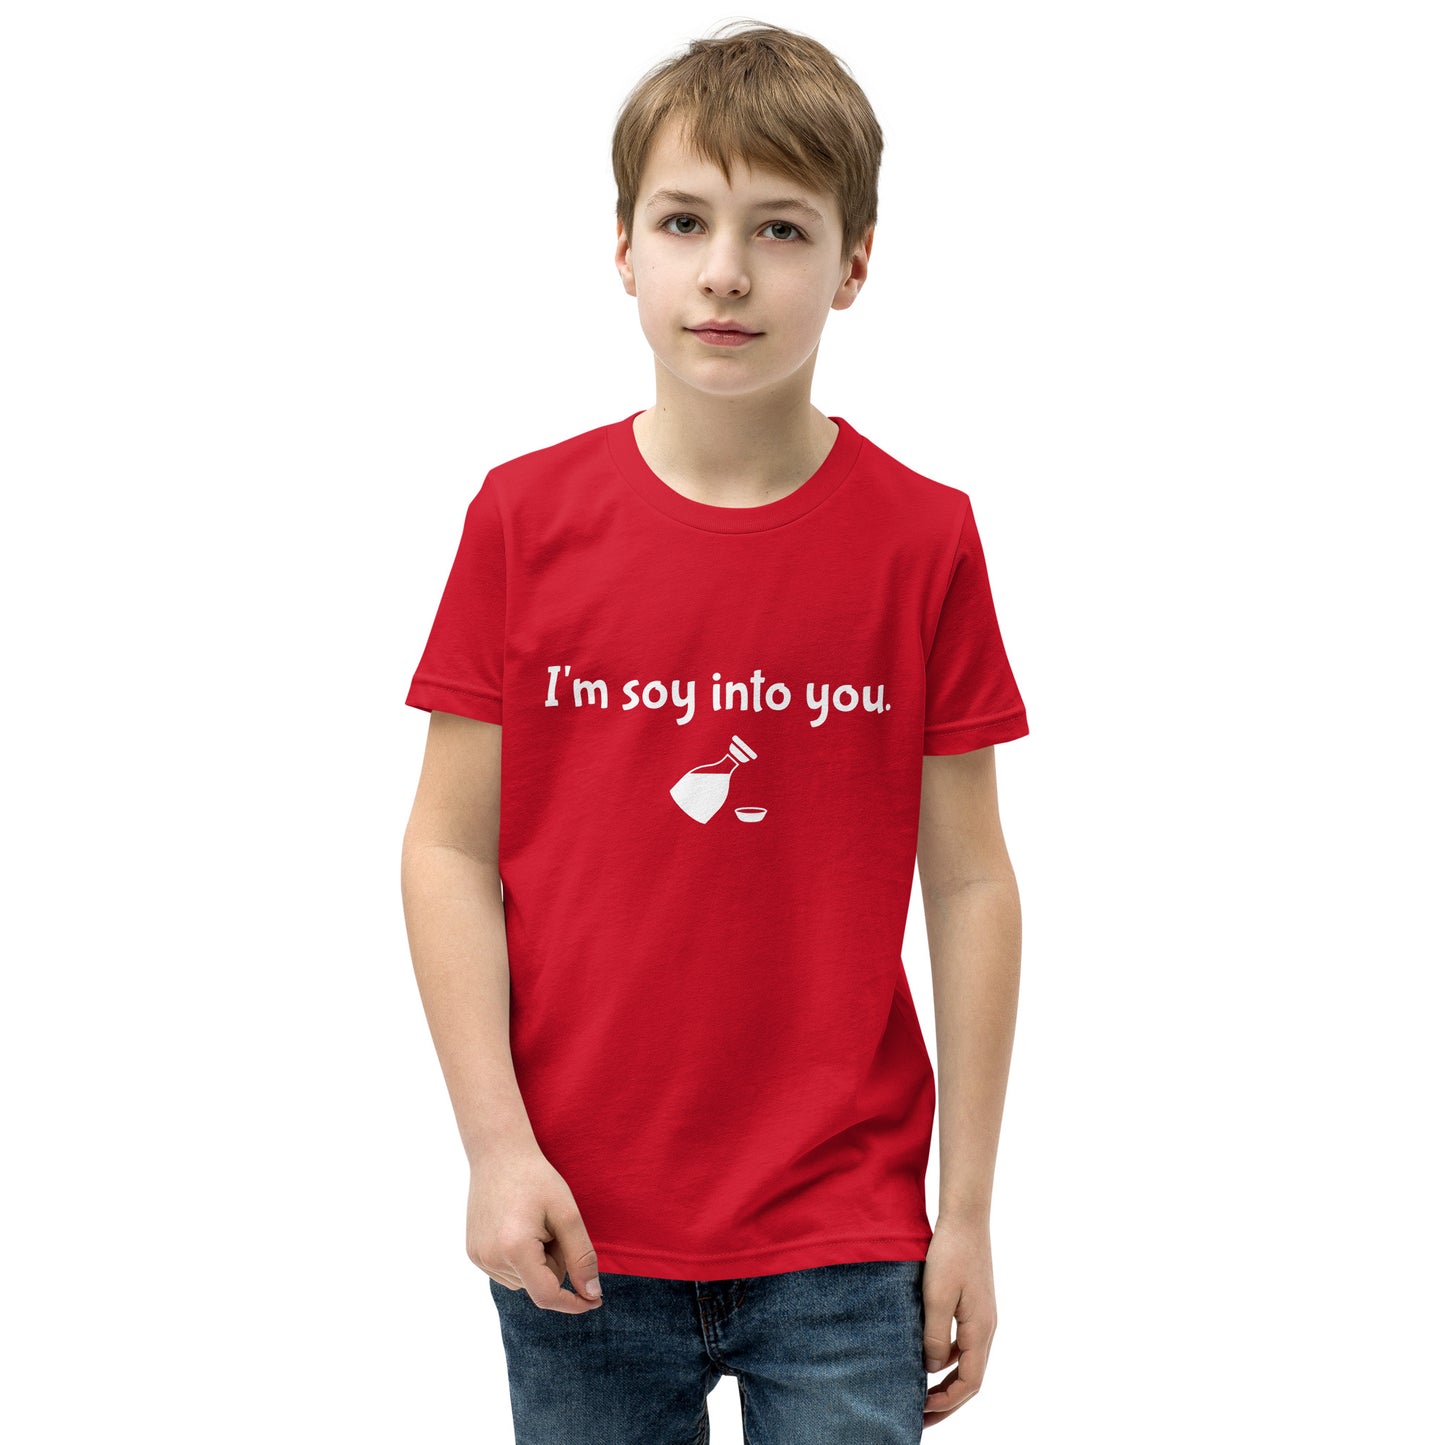 Youth Short Sleeve T-Shirt - I'm Soy Into You